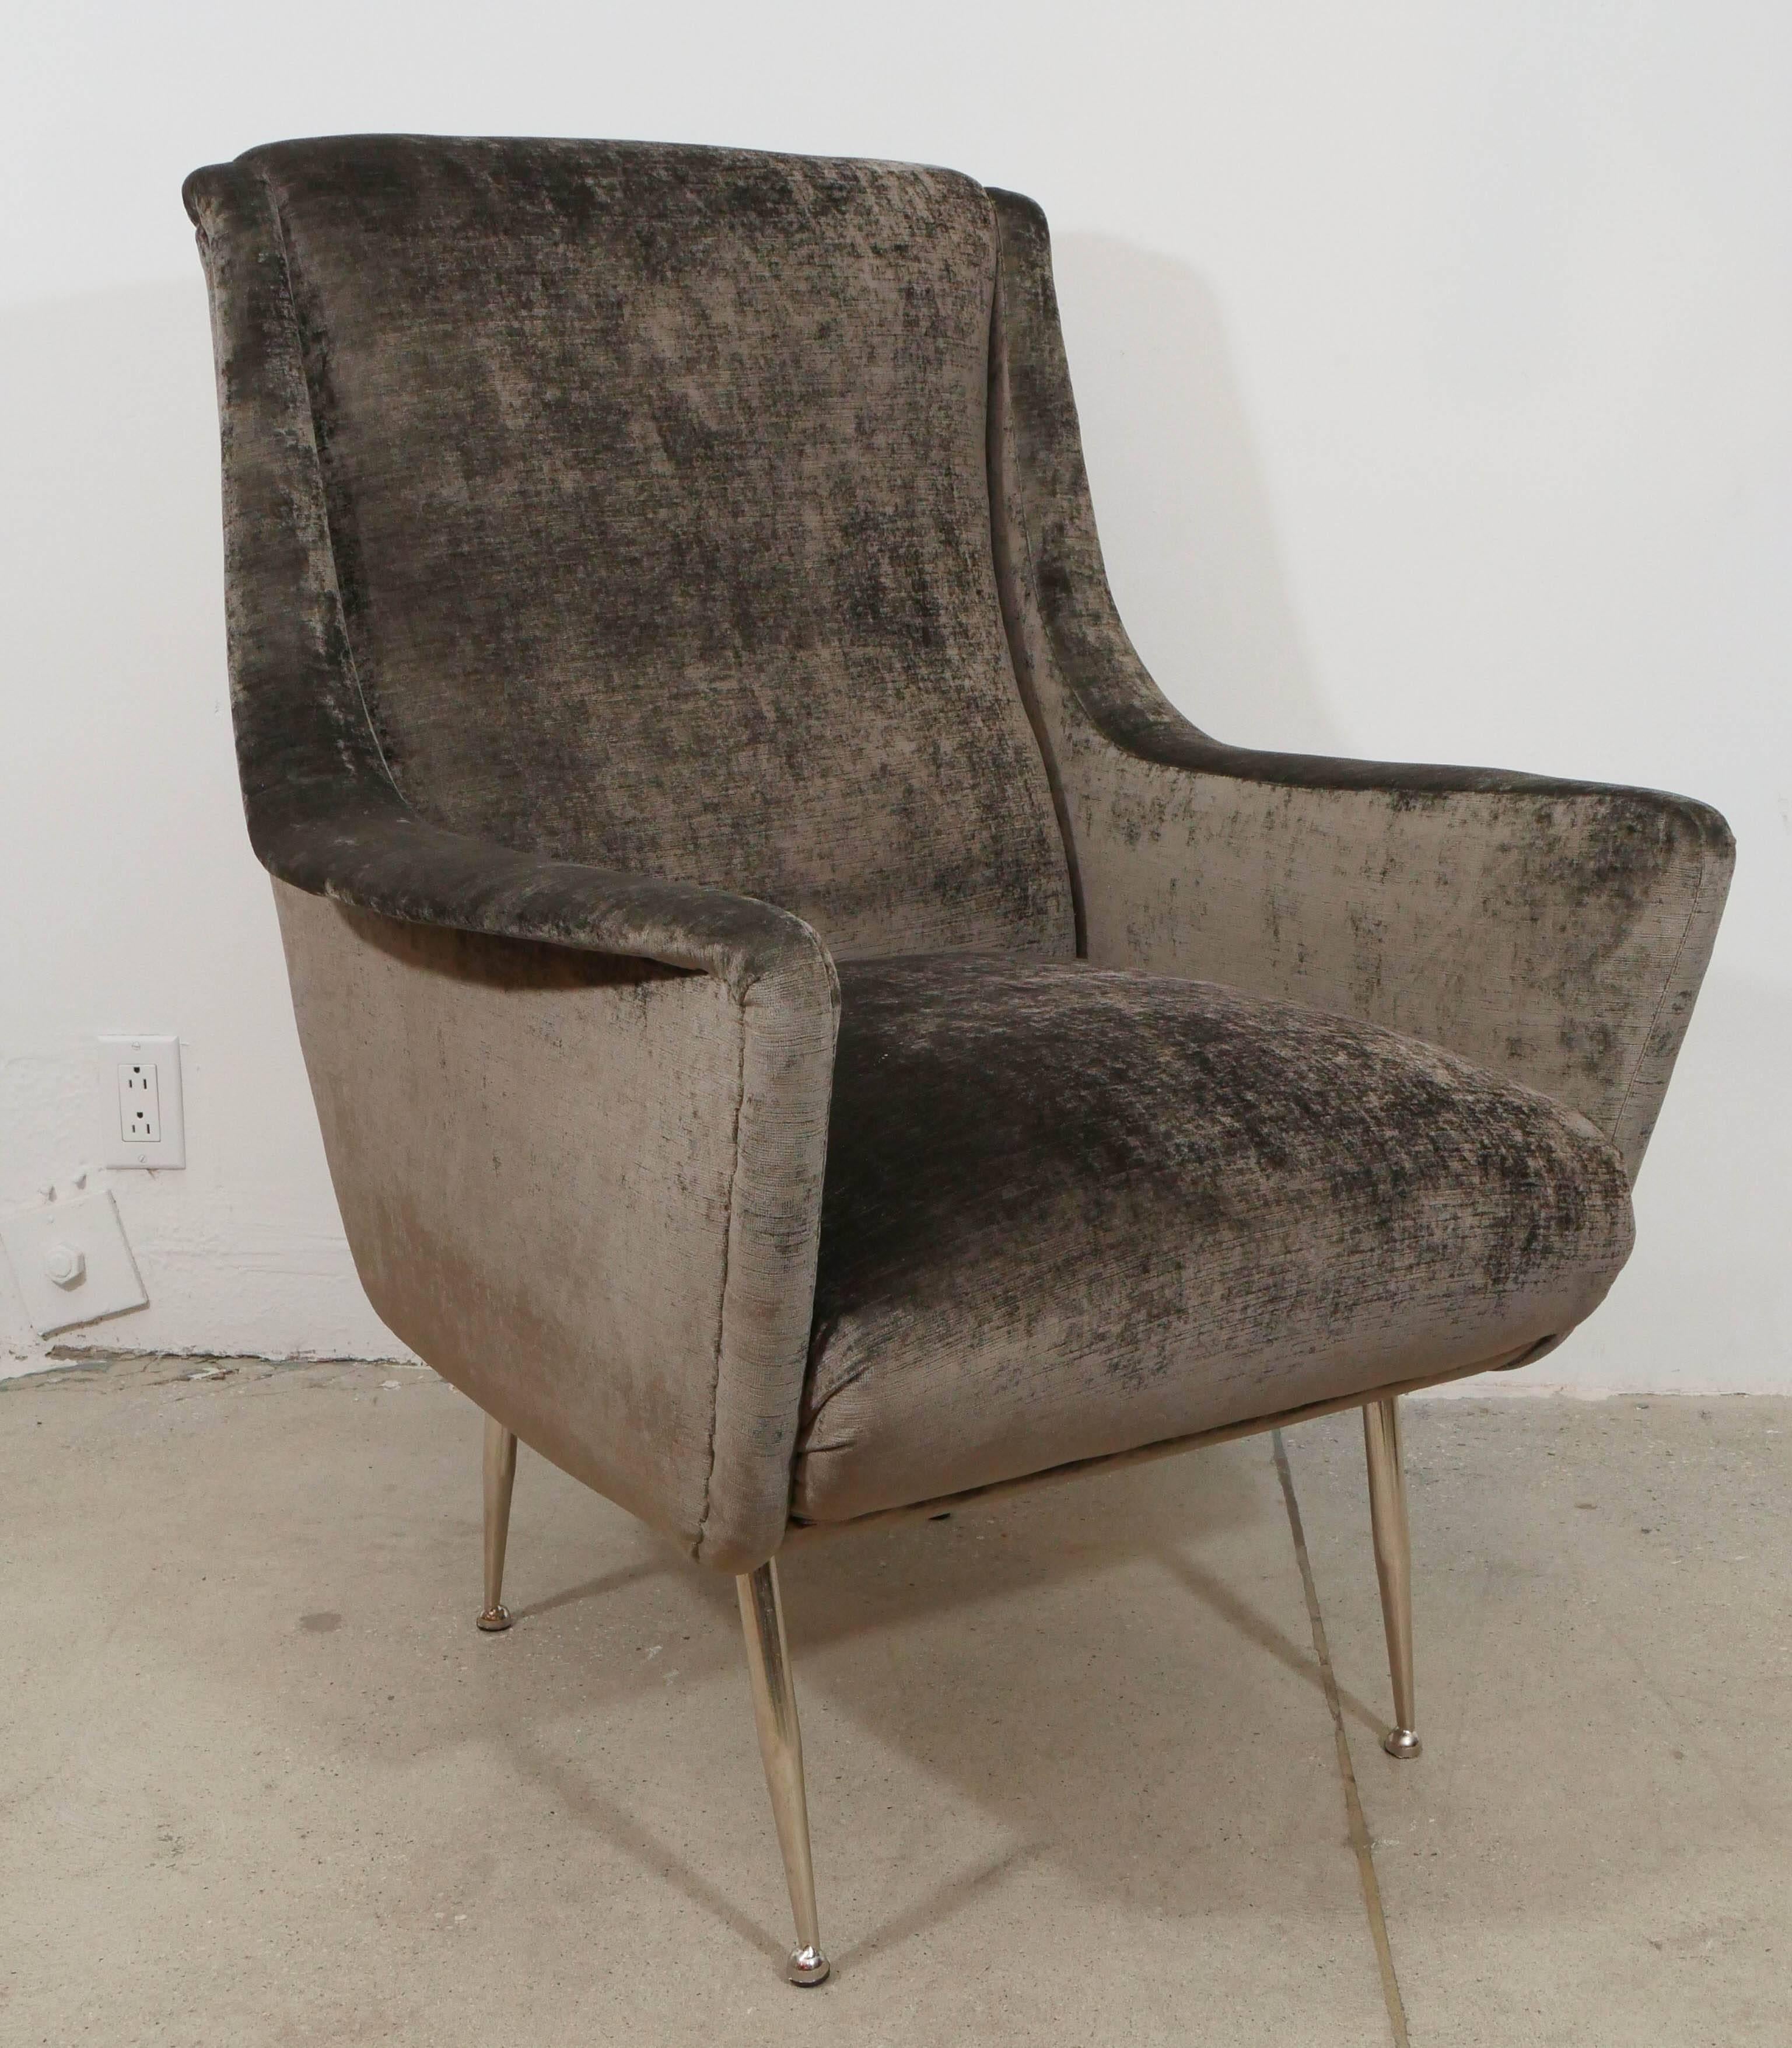 Elegant pair of chairs reupholstered with a muted brown velours.
The silver metal of the legs have been re-polished.
The chairs have elegant lines from the side and the back and are extremely comfortable.
     